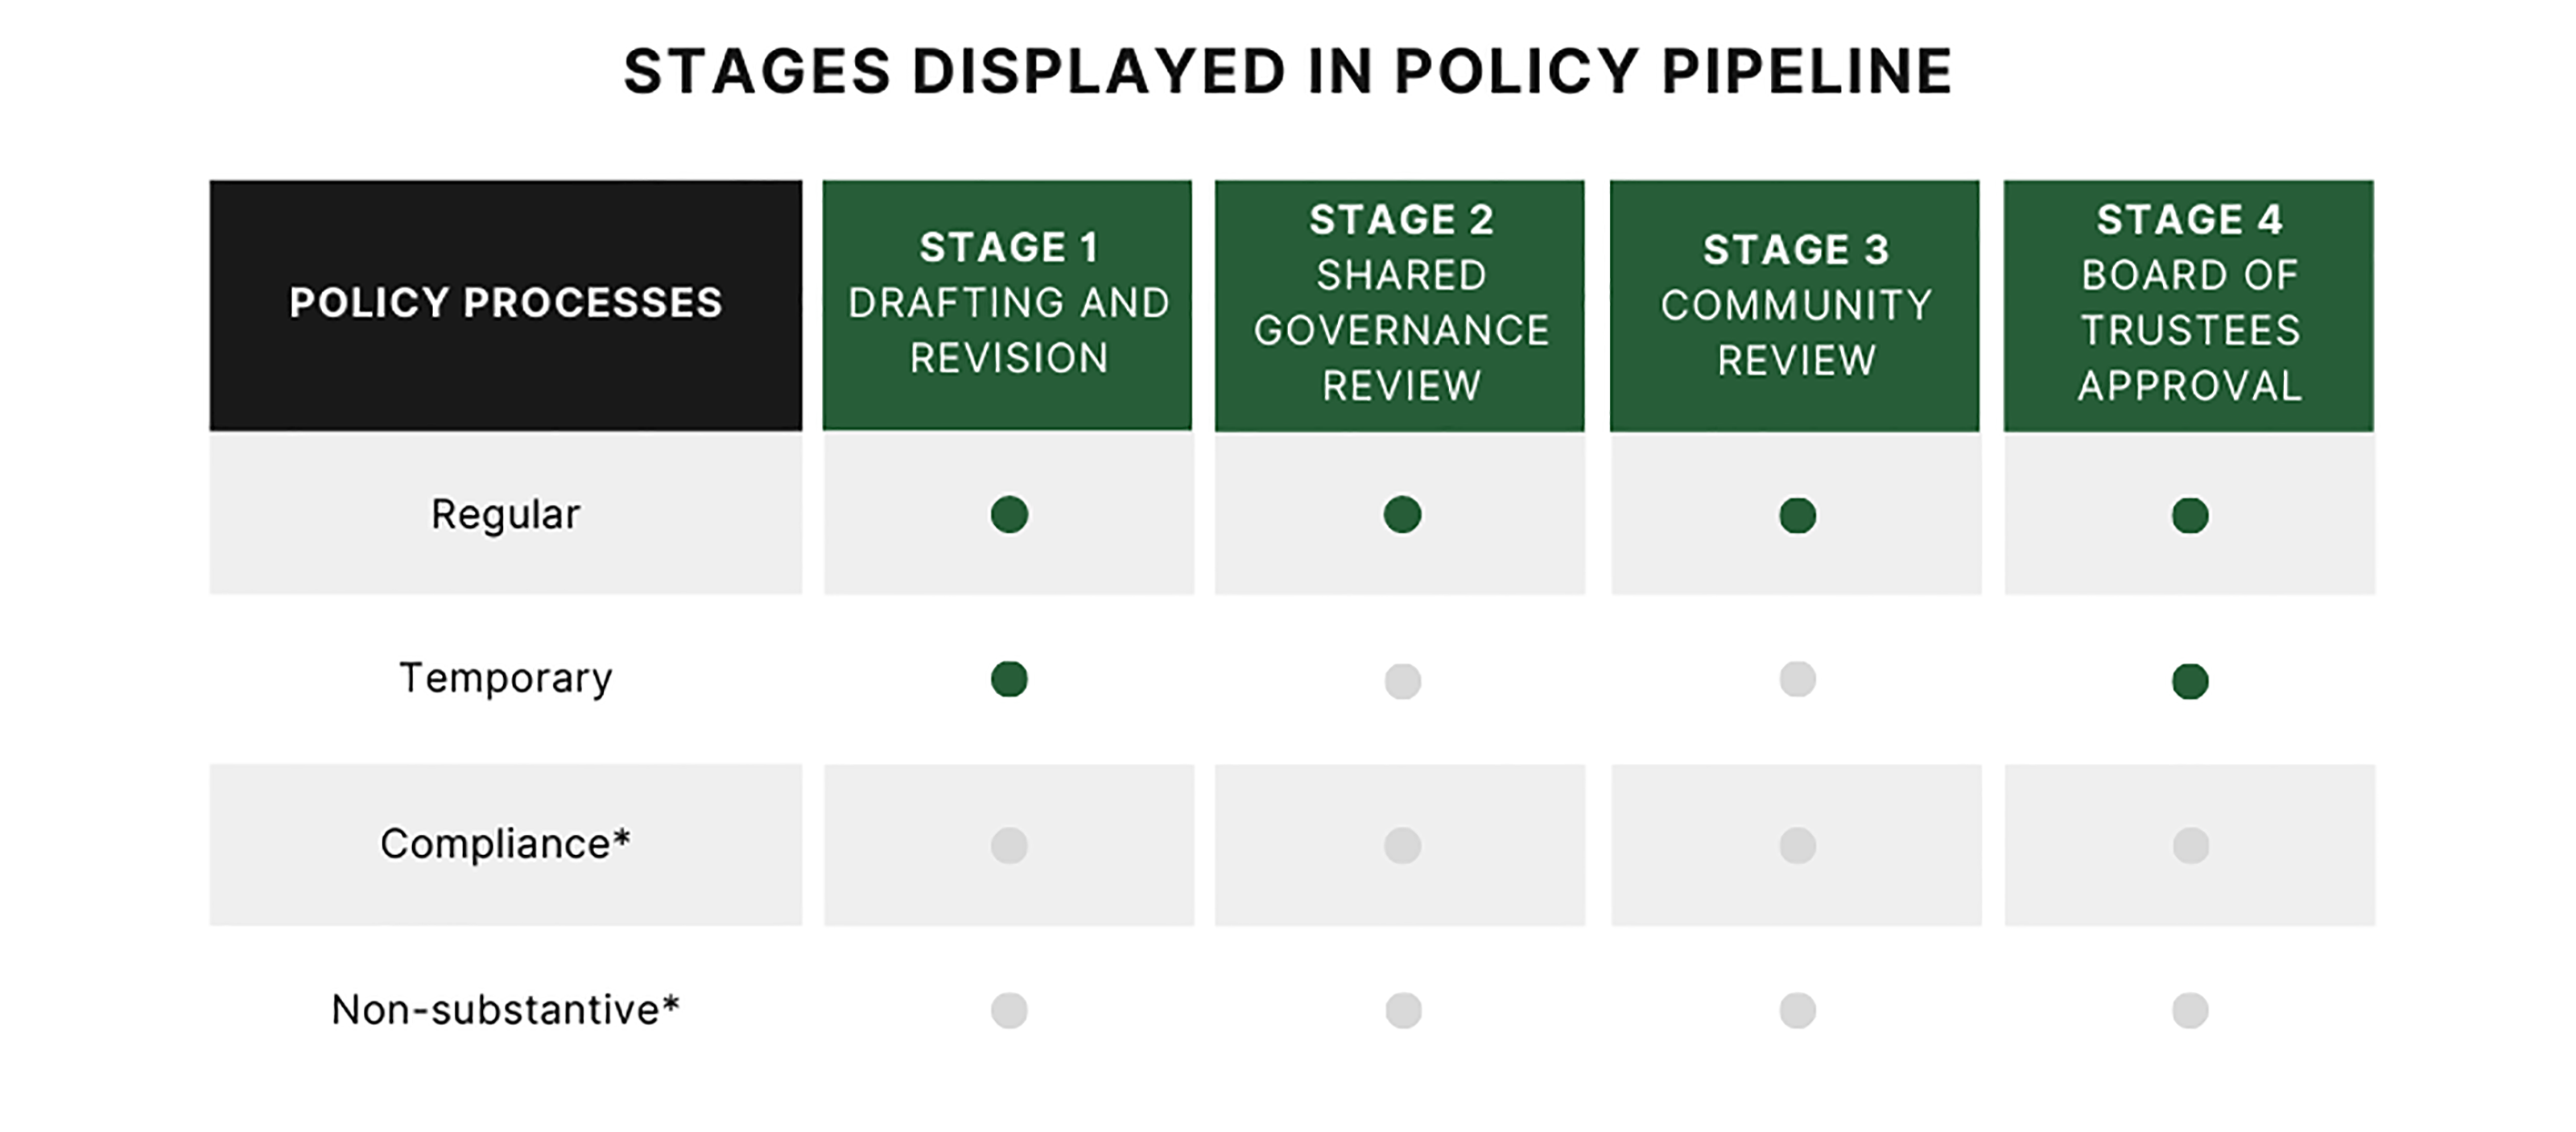 A chart demonstrating which policy process stages are displace in the Policy Pipeline. Compliance and Non-substantive processes are not displayed in the Policy Pipeline.